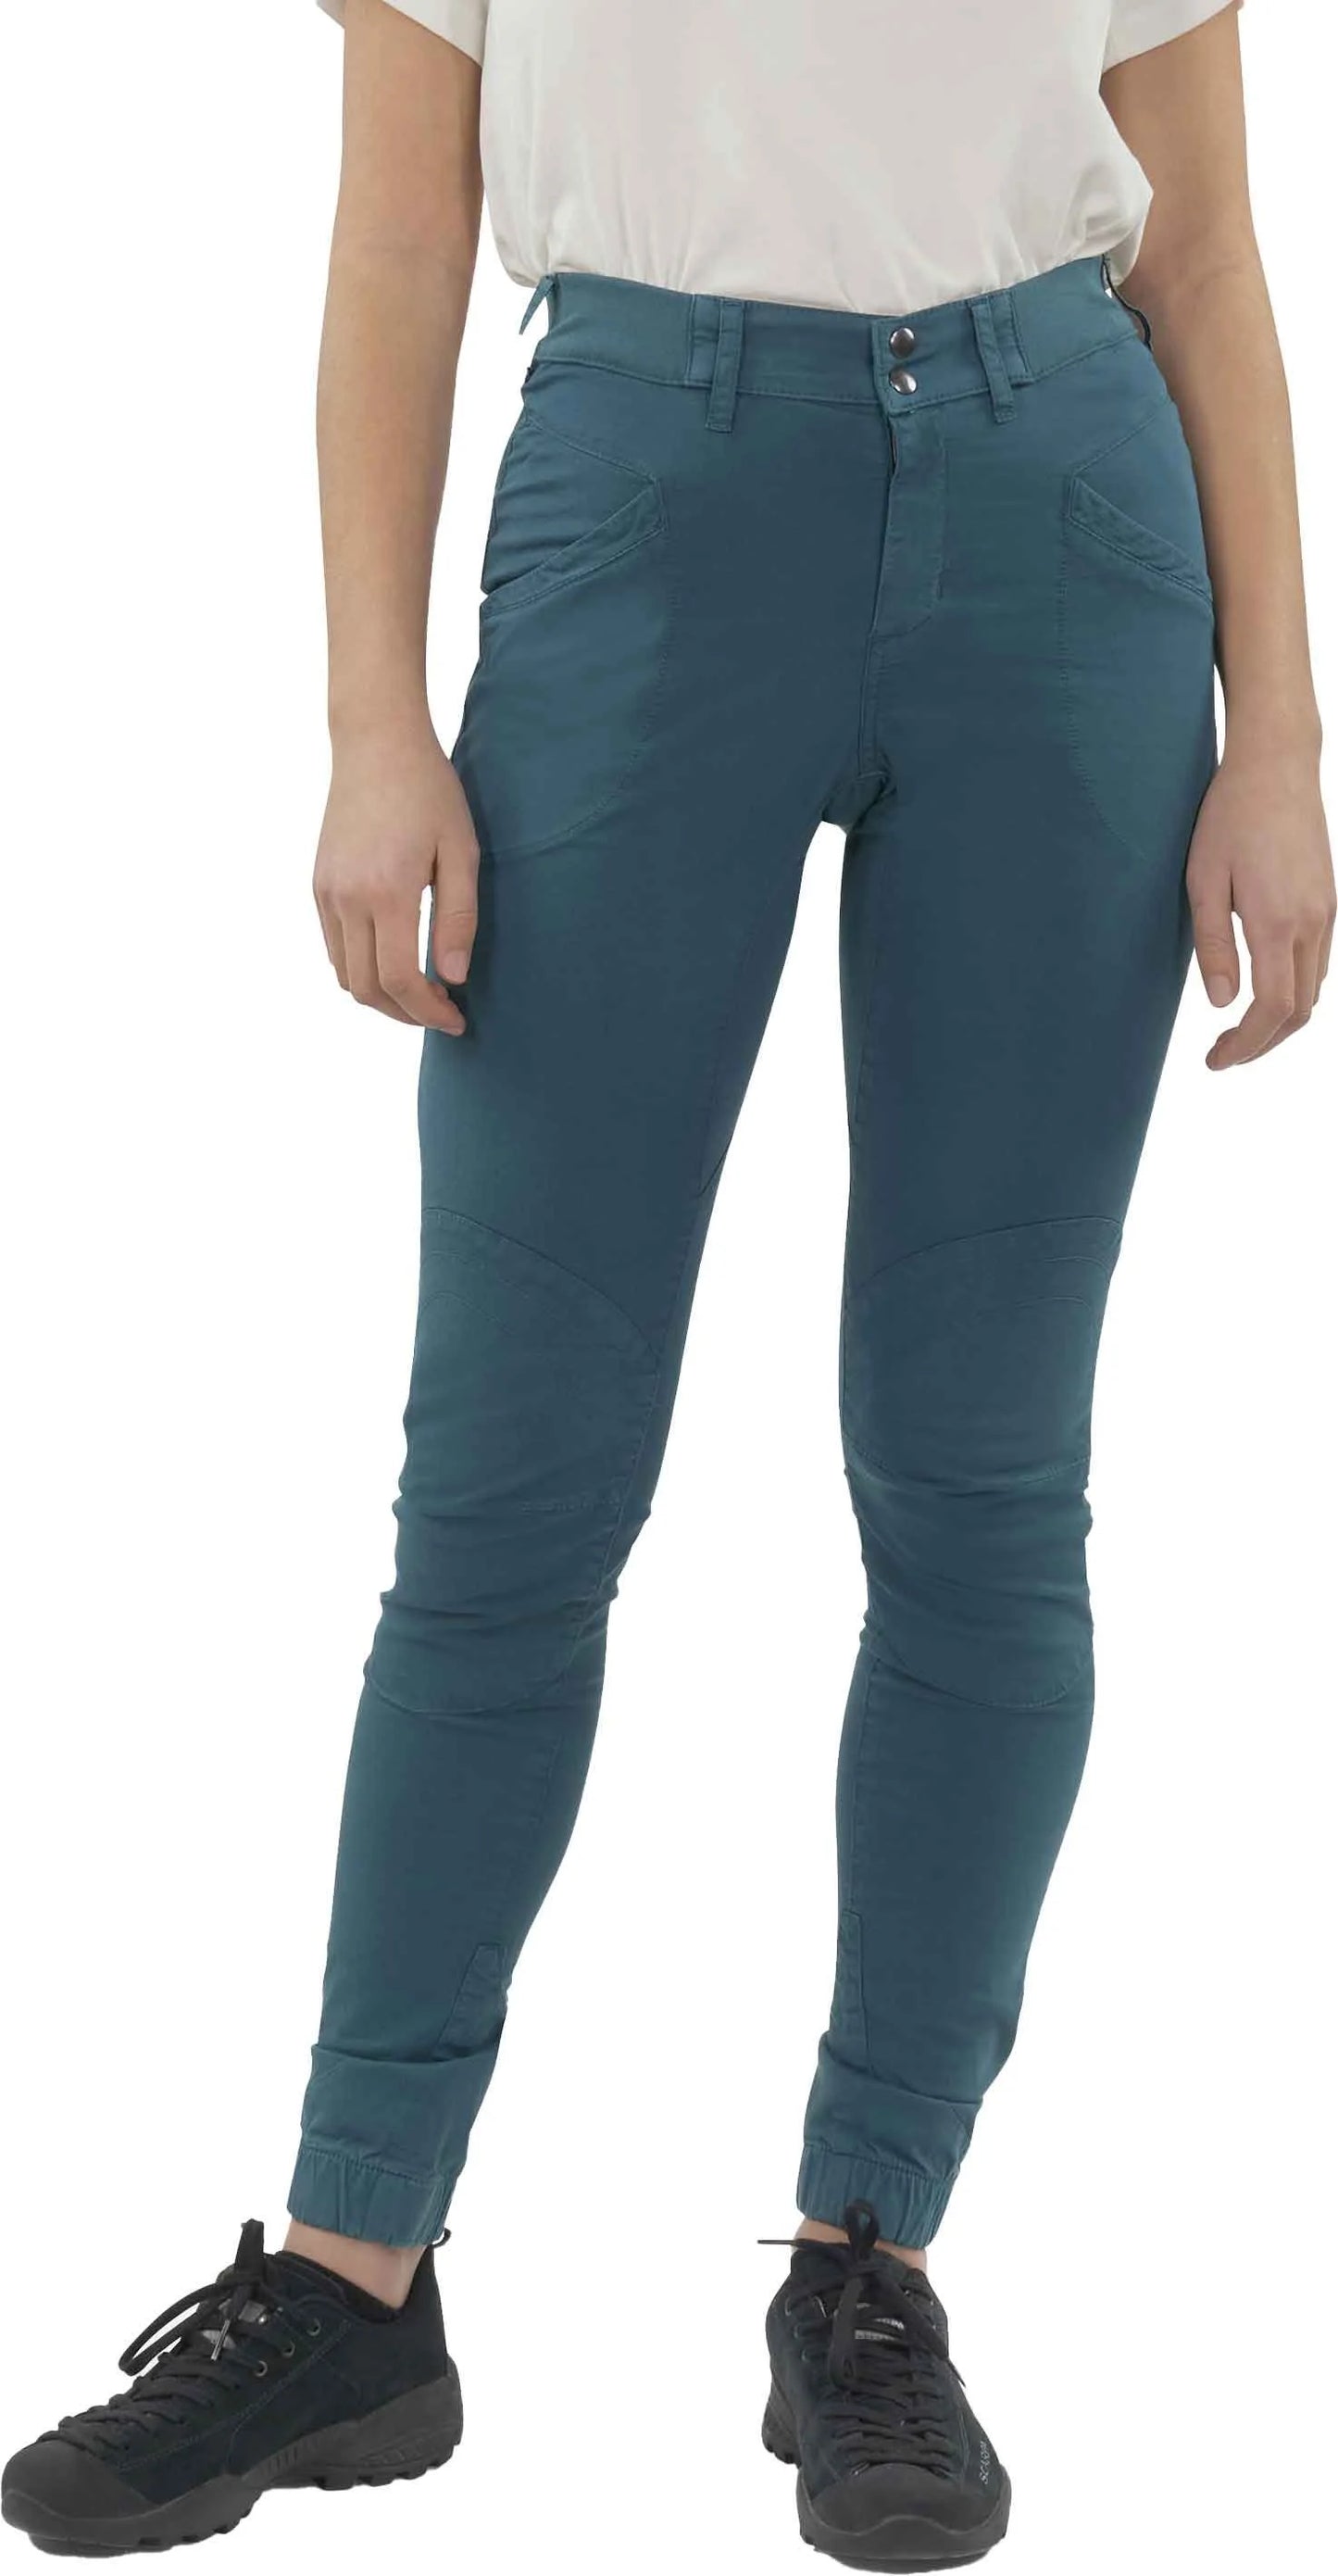 Looking For Wild - Laila Peak Pant - Teal Green